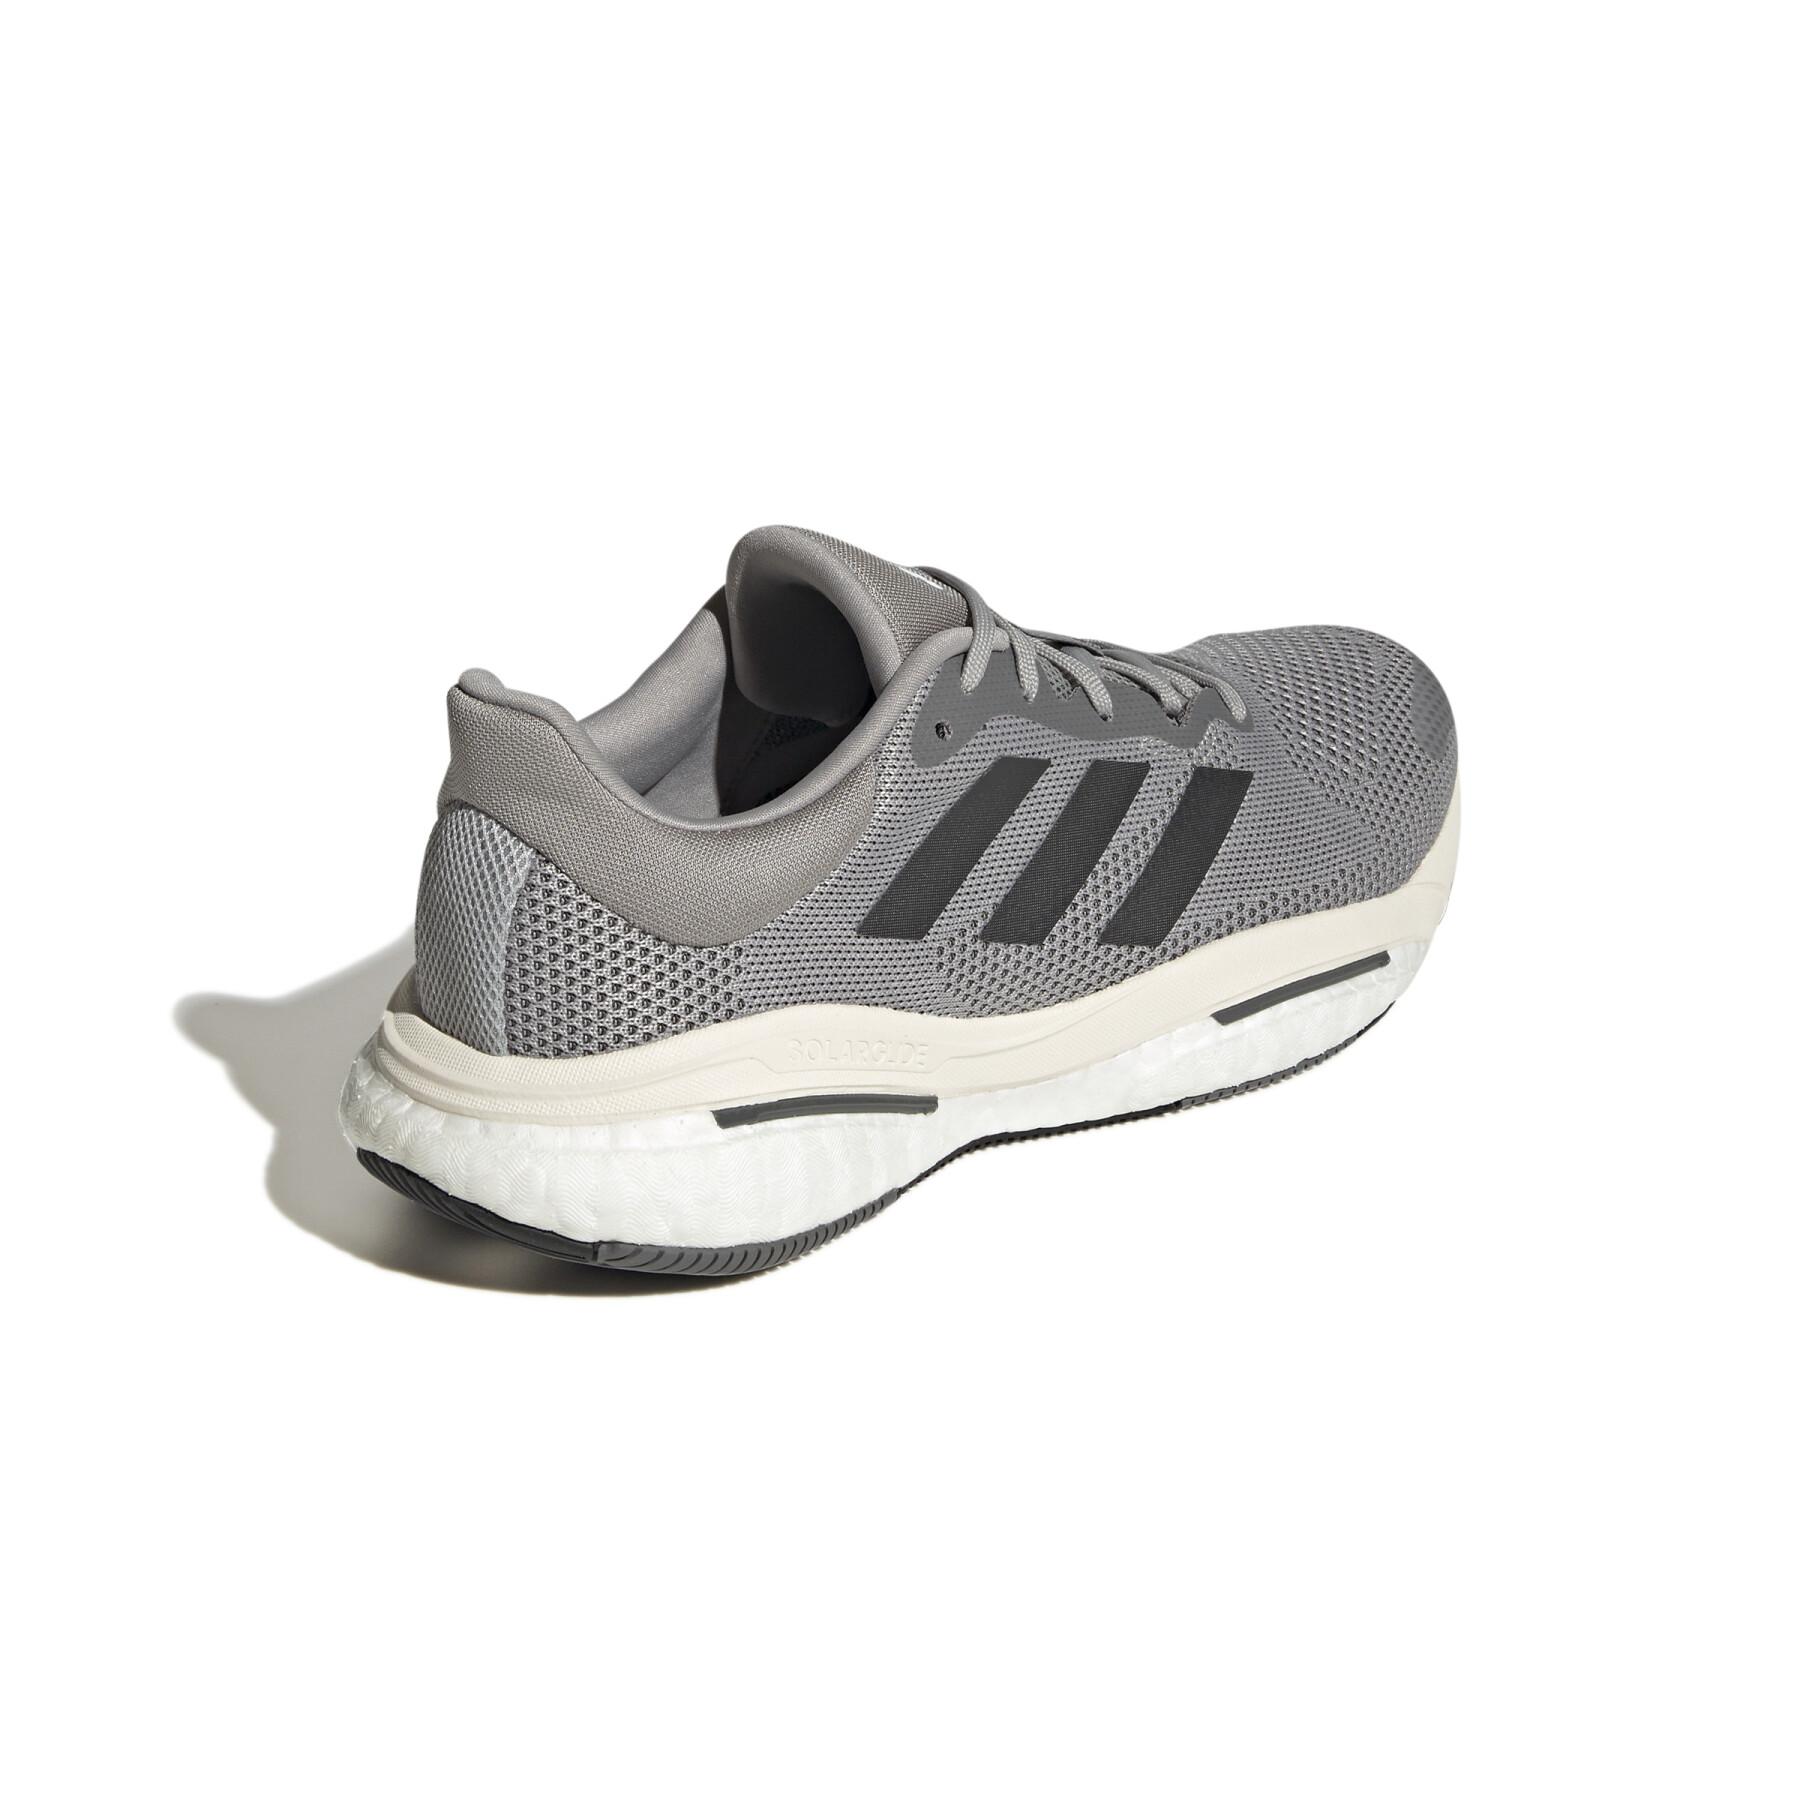 Running shoes adidas Solarglide 5